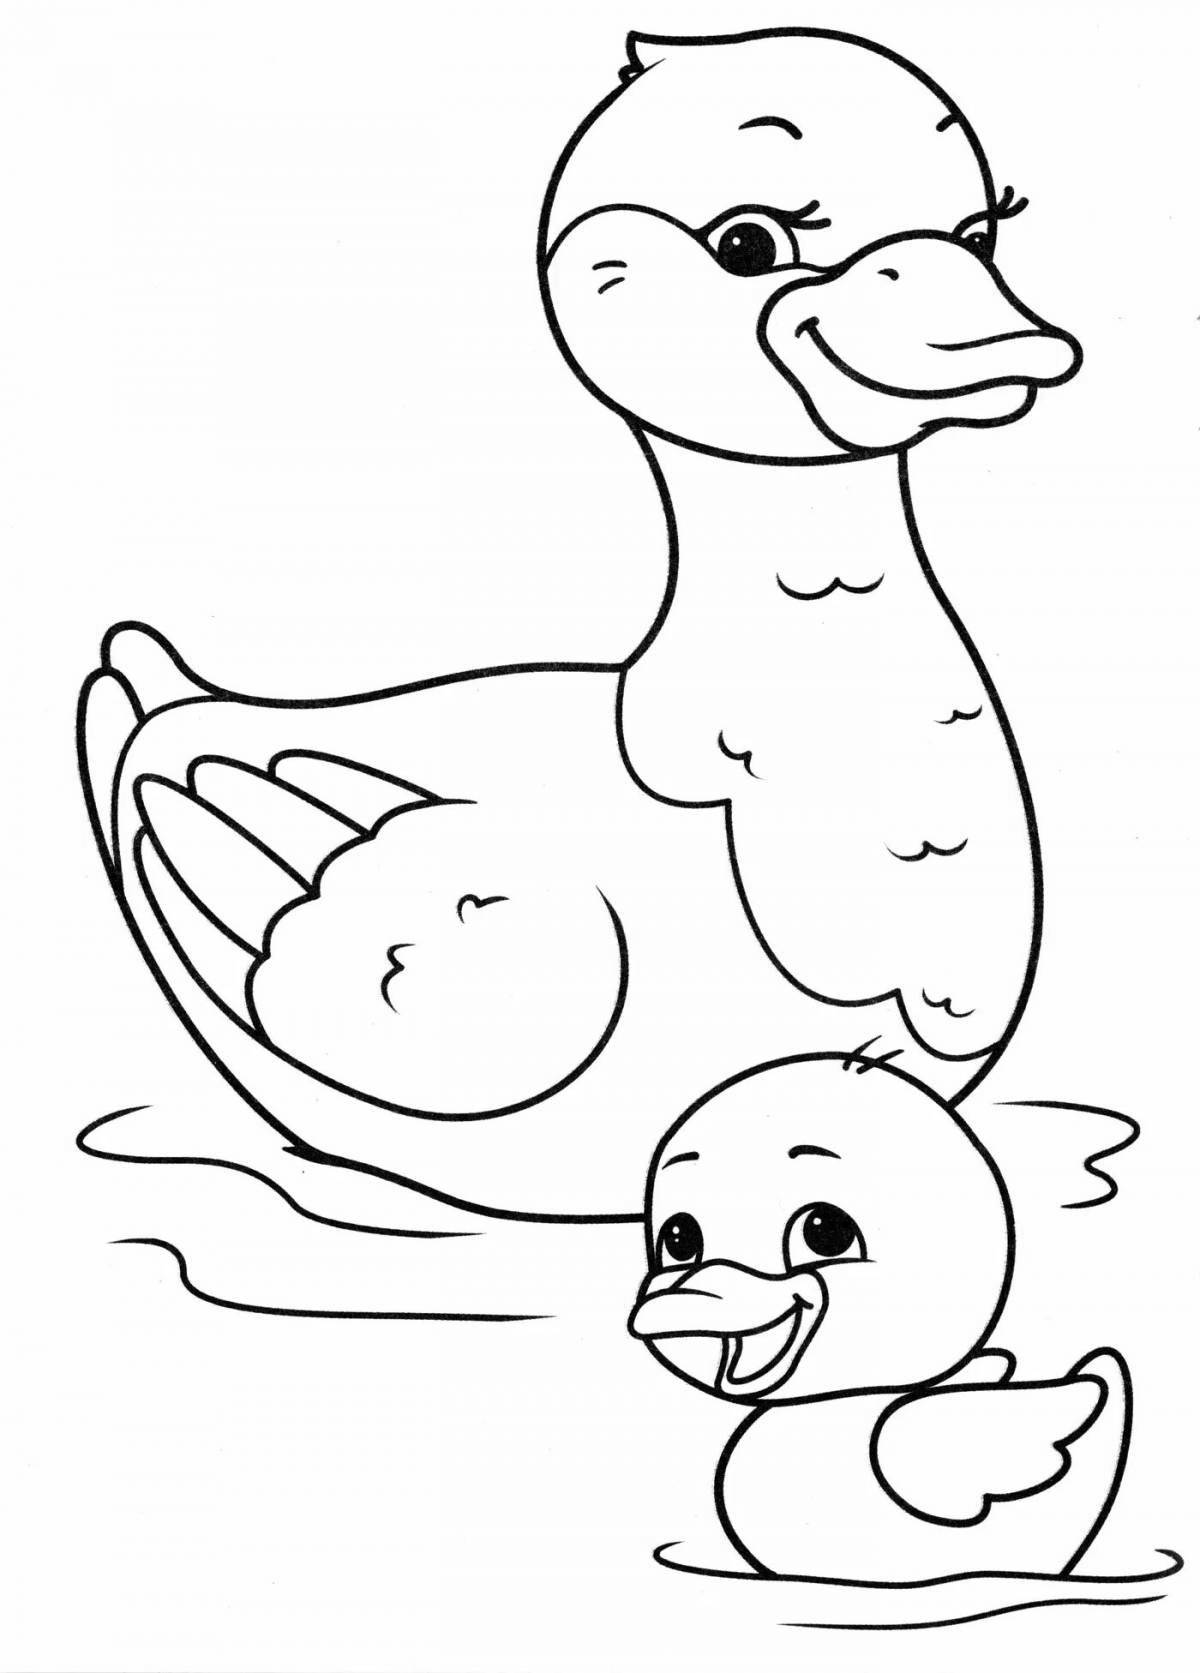 Coloring cute duck for kids